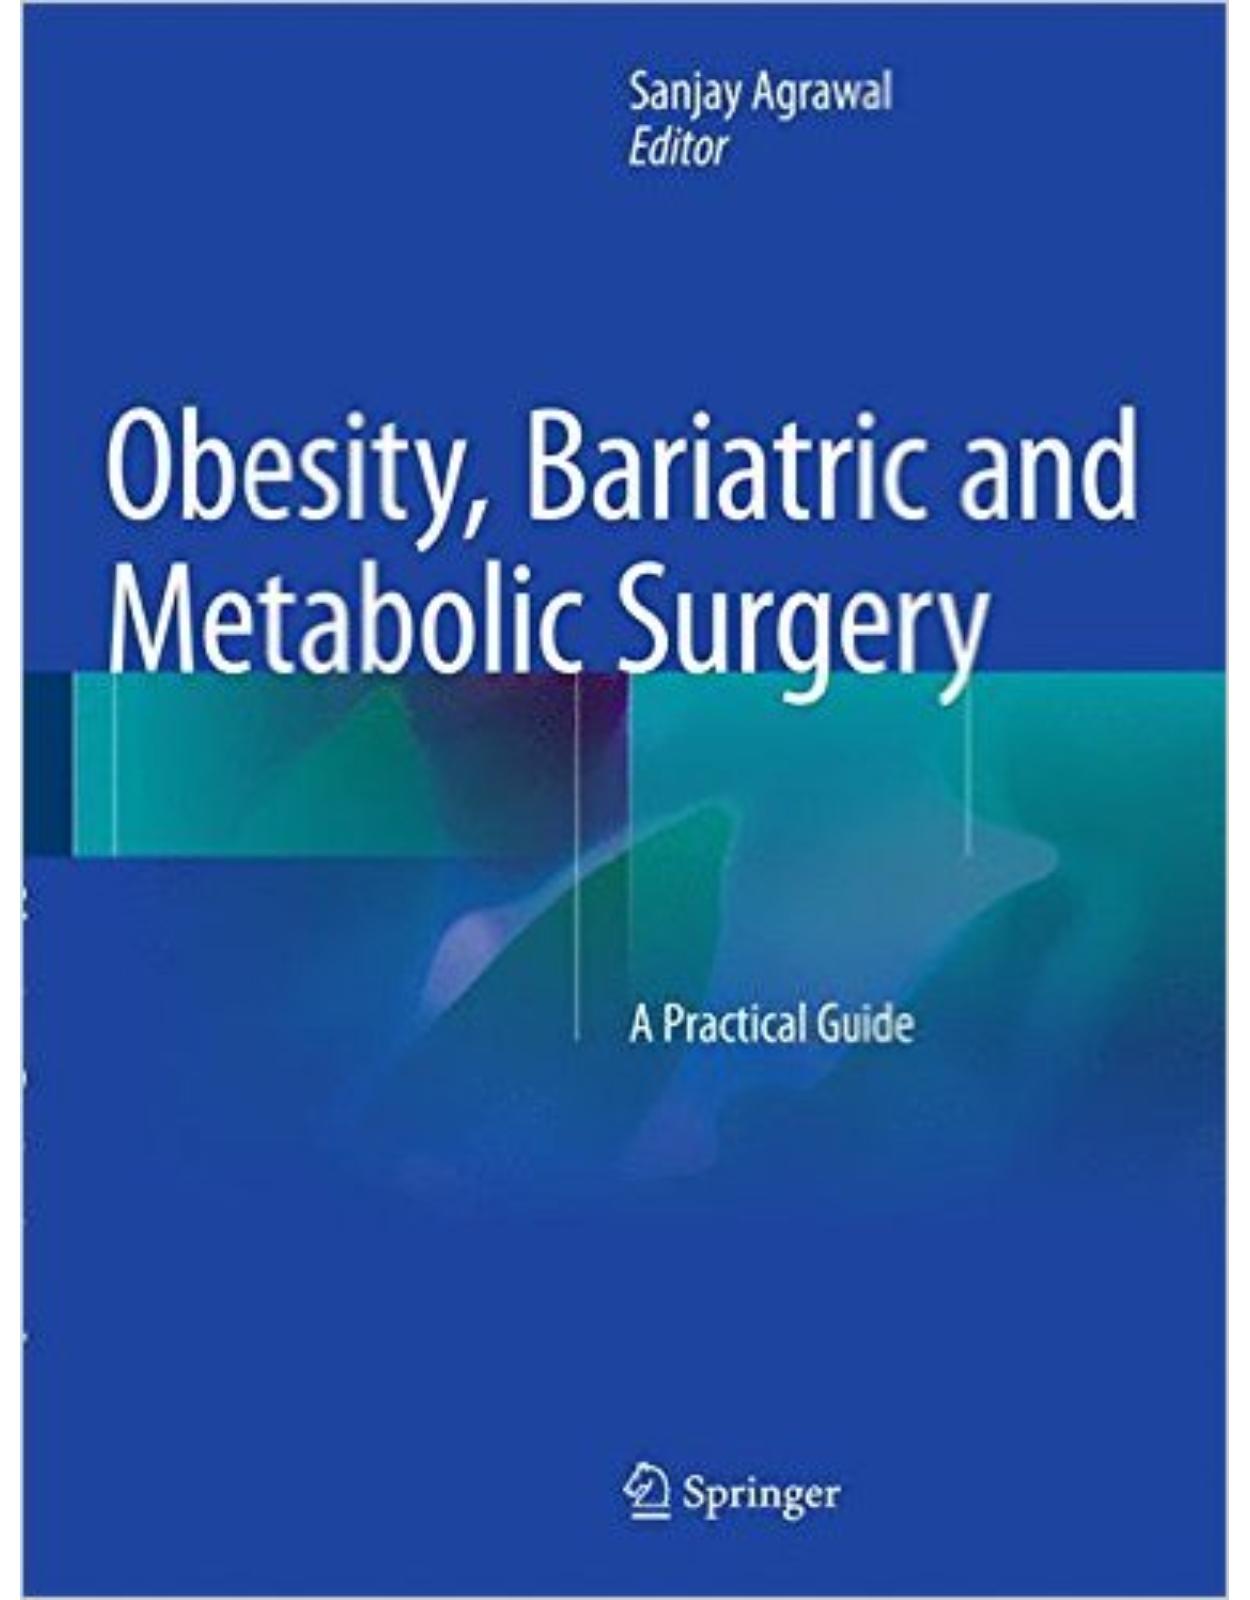 Obesity, Bariatric and Metabolic Surgery. A Practical Guide